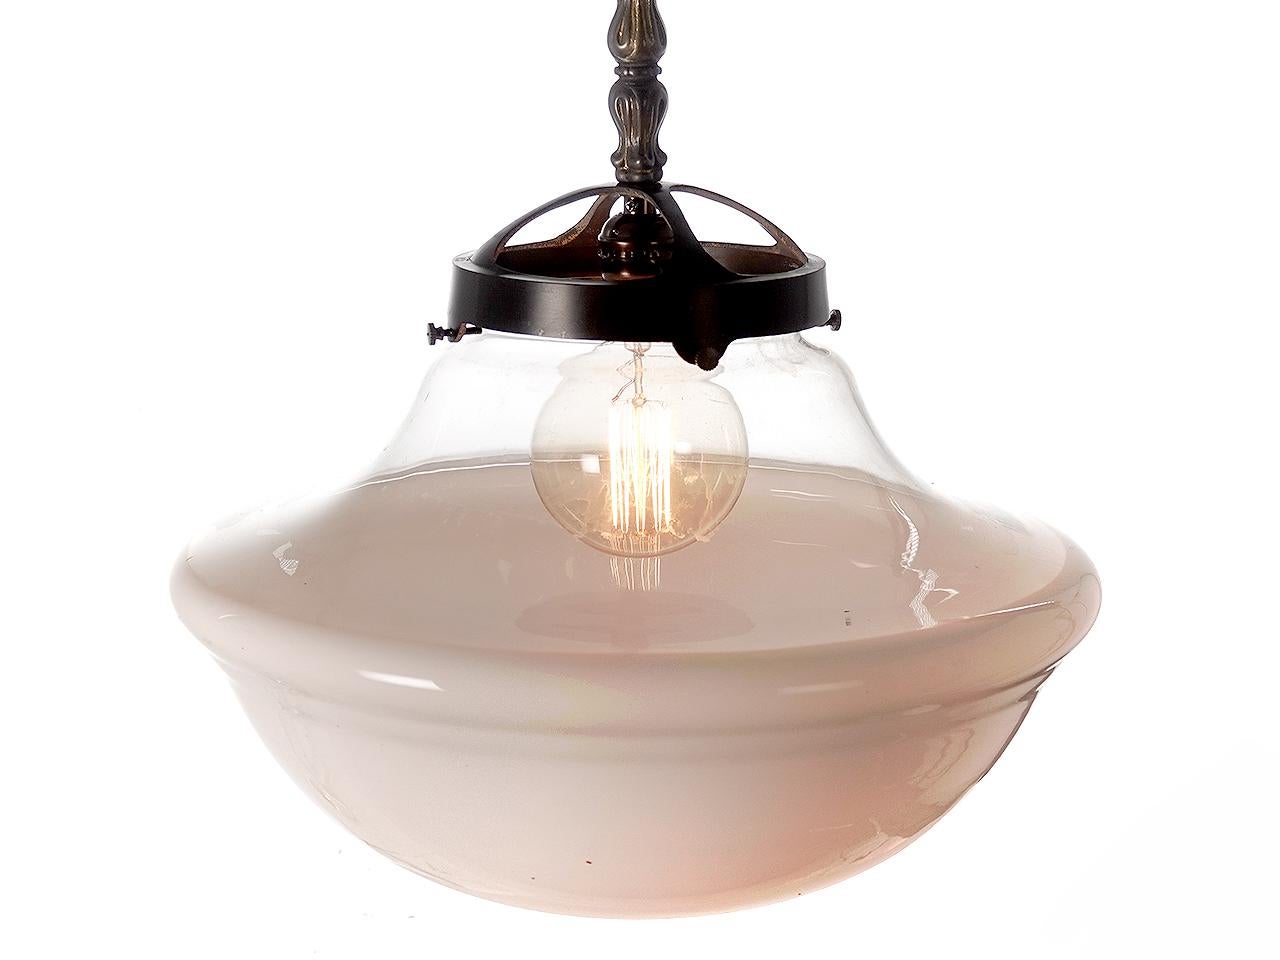 These lamps are sold as a matching pair. One price for the set. Early schoolhouse pendents have always been popular. This example is unique because the top half is clear glass giving them a different look. The bottom half is milk glass and it almost